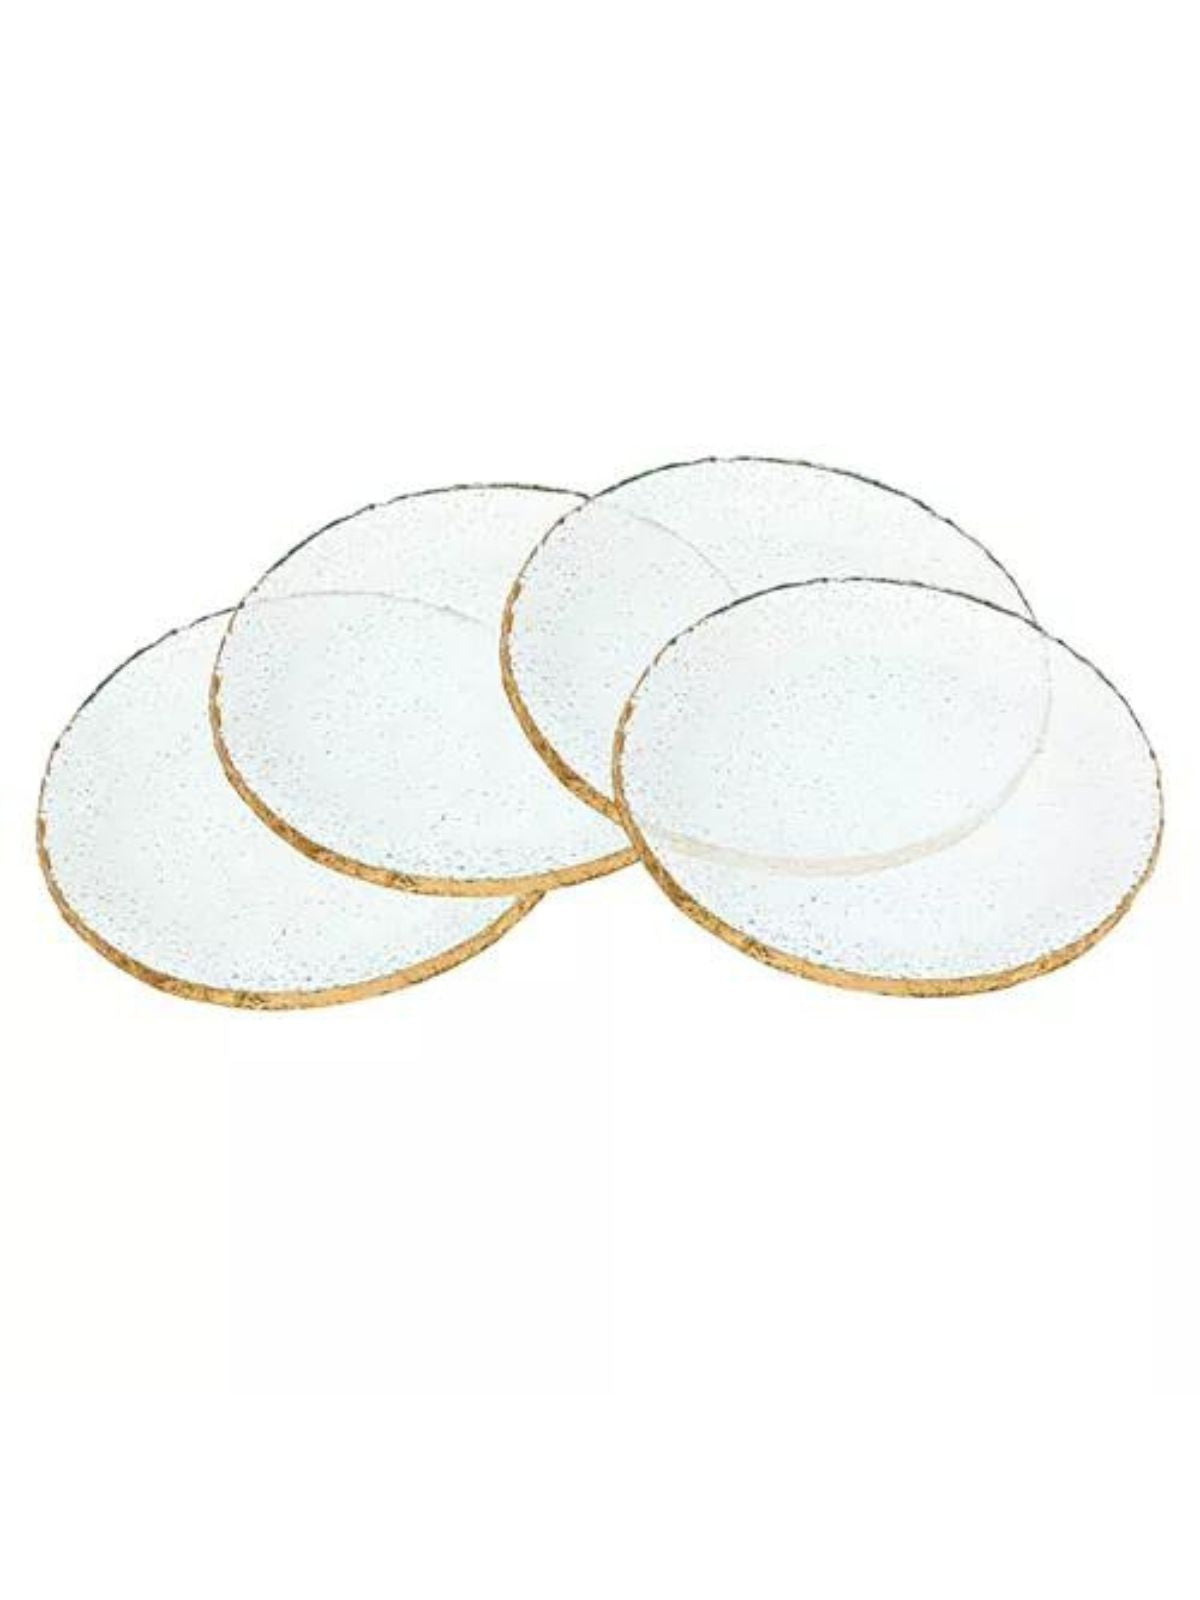 Set of 4 7 inch round crystal glass dessert plates with gold trim - KYA Home Decor. 